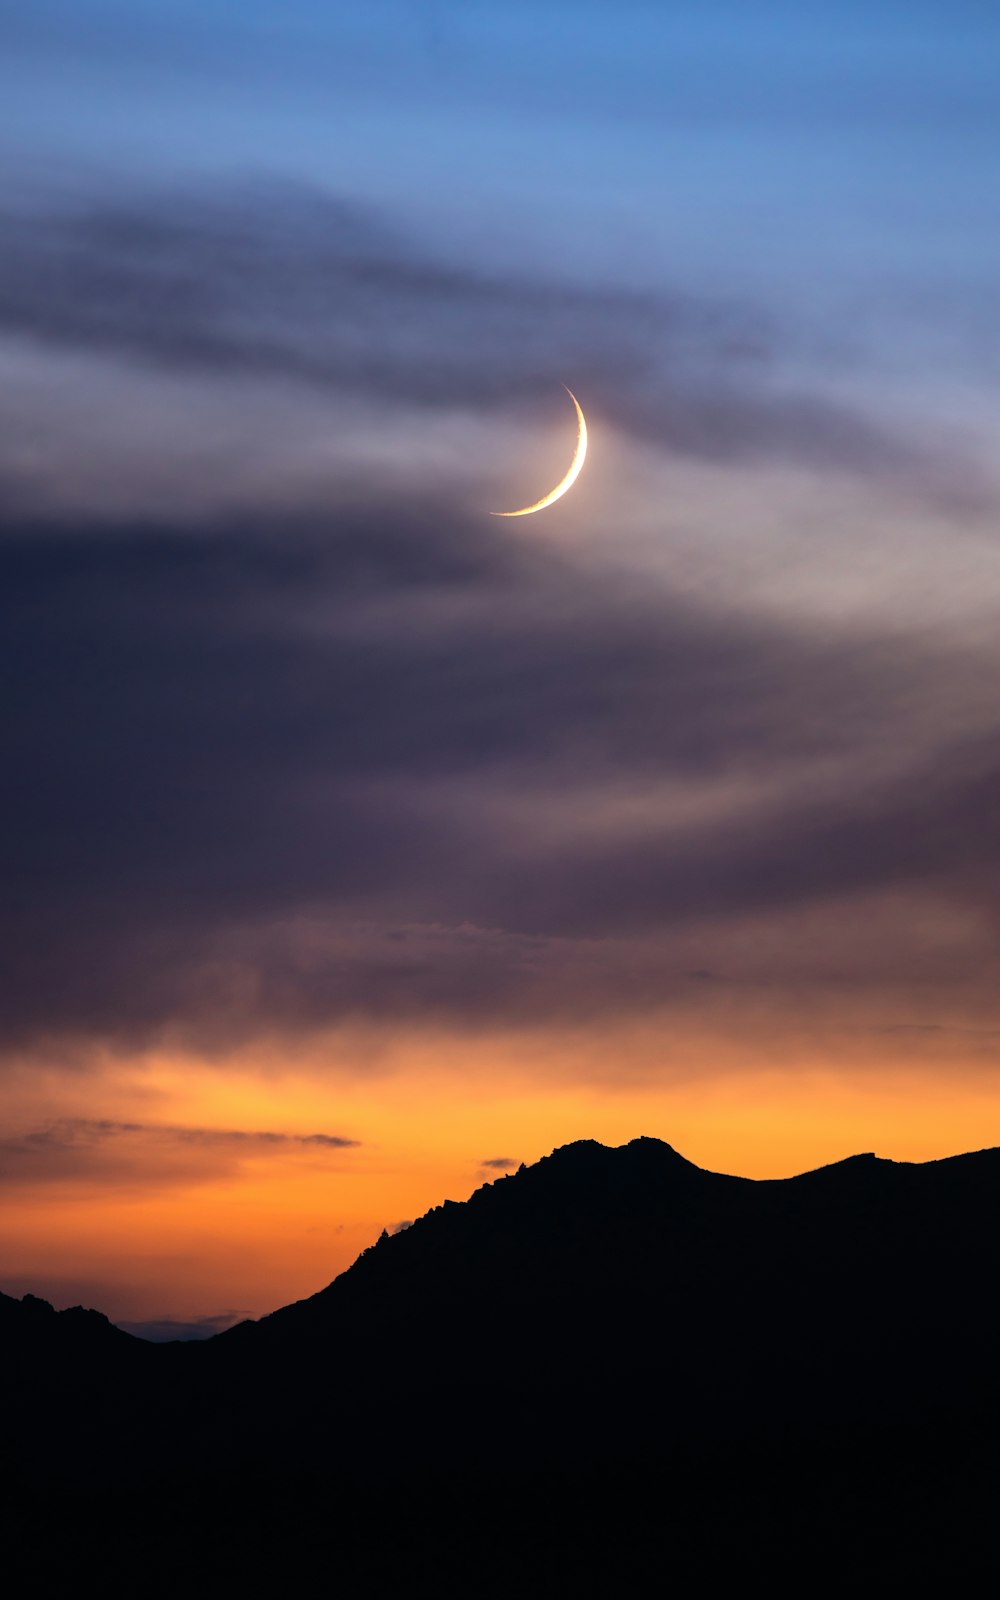 a crescent is seen in the sky over a mountain